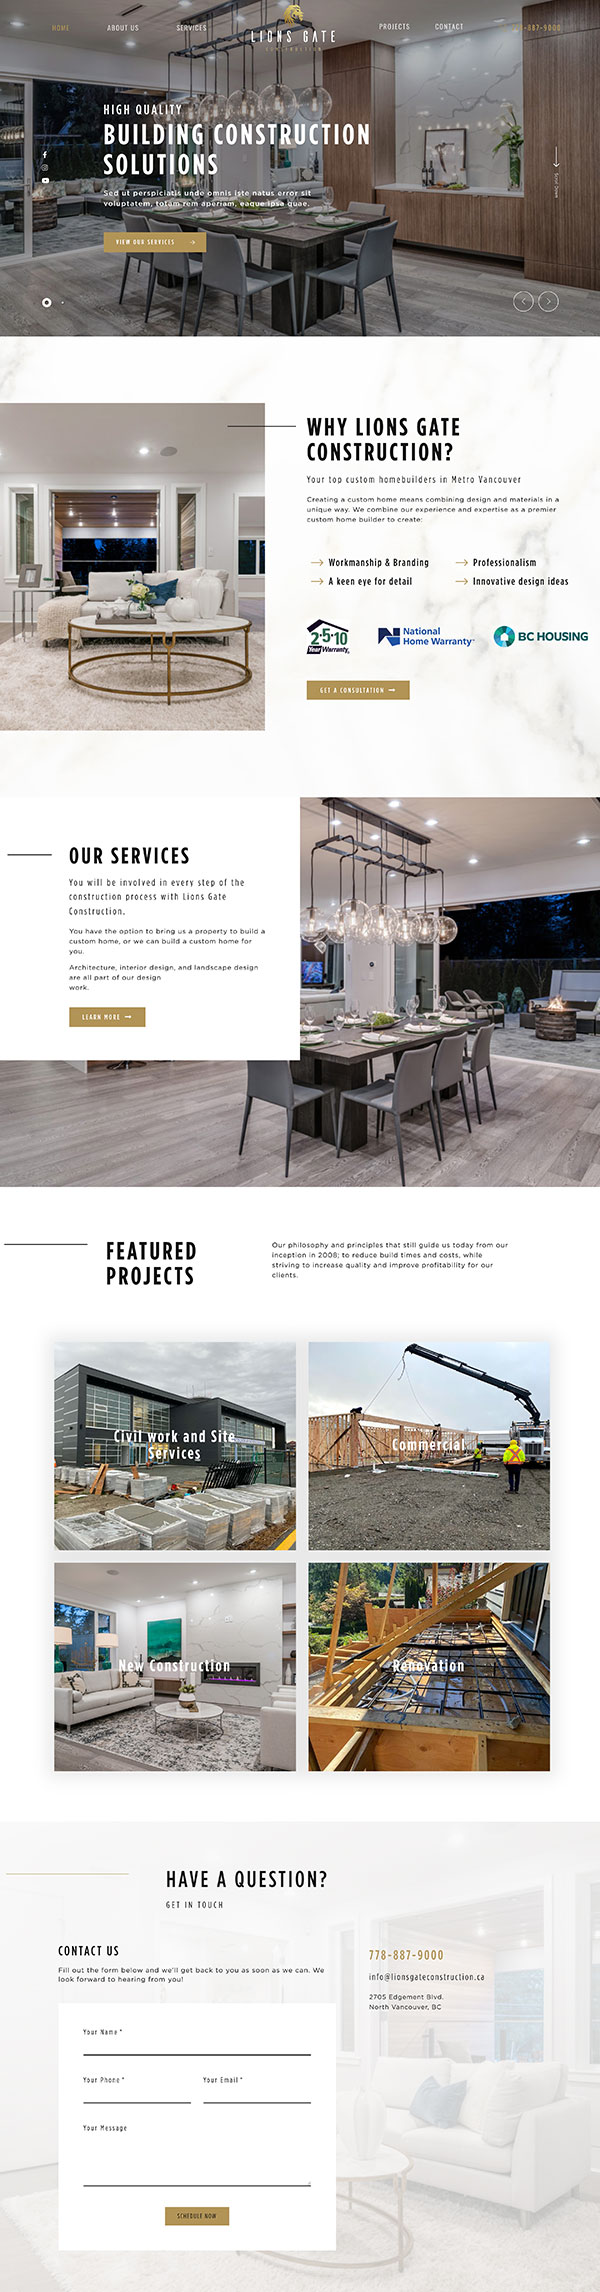 Web Design And Development For Lions Gate Construction Company Vancouver